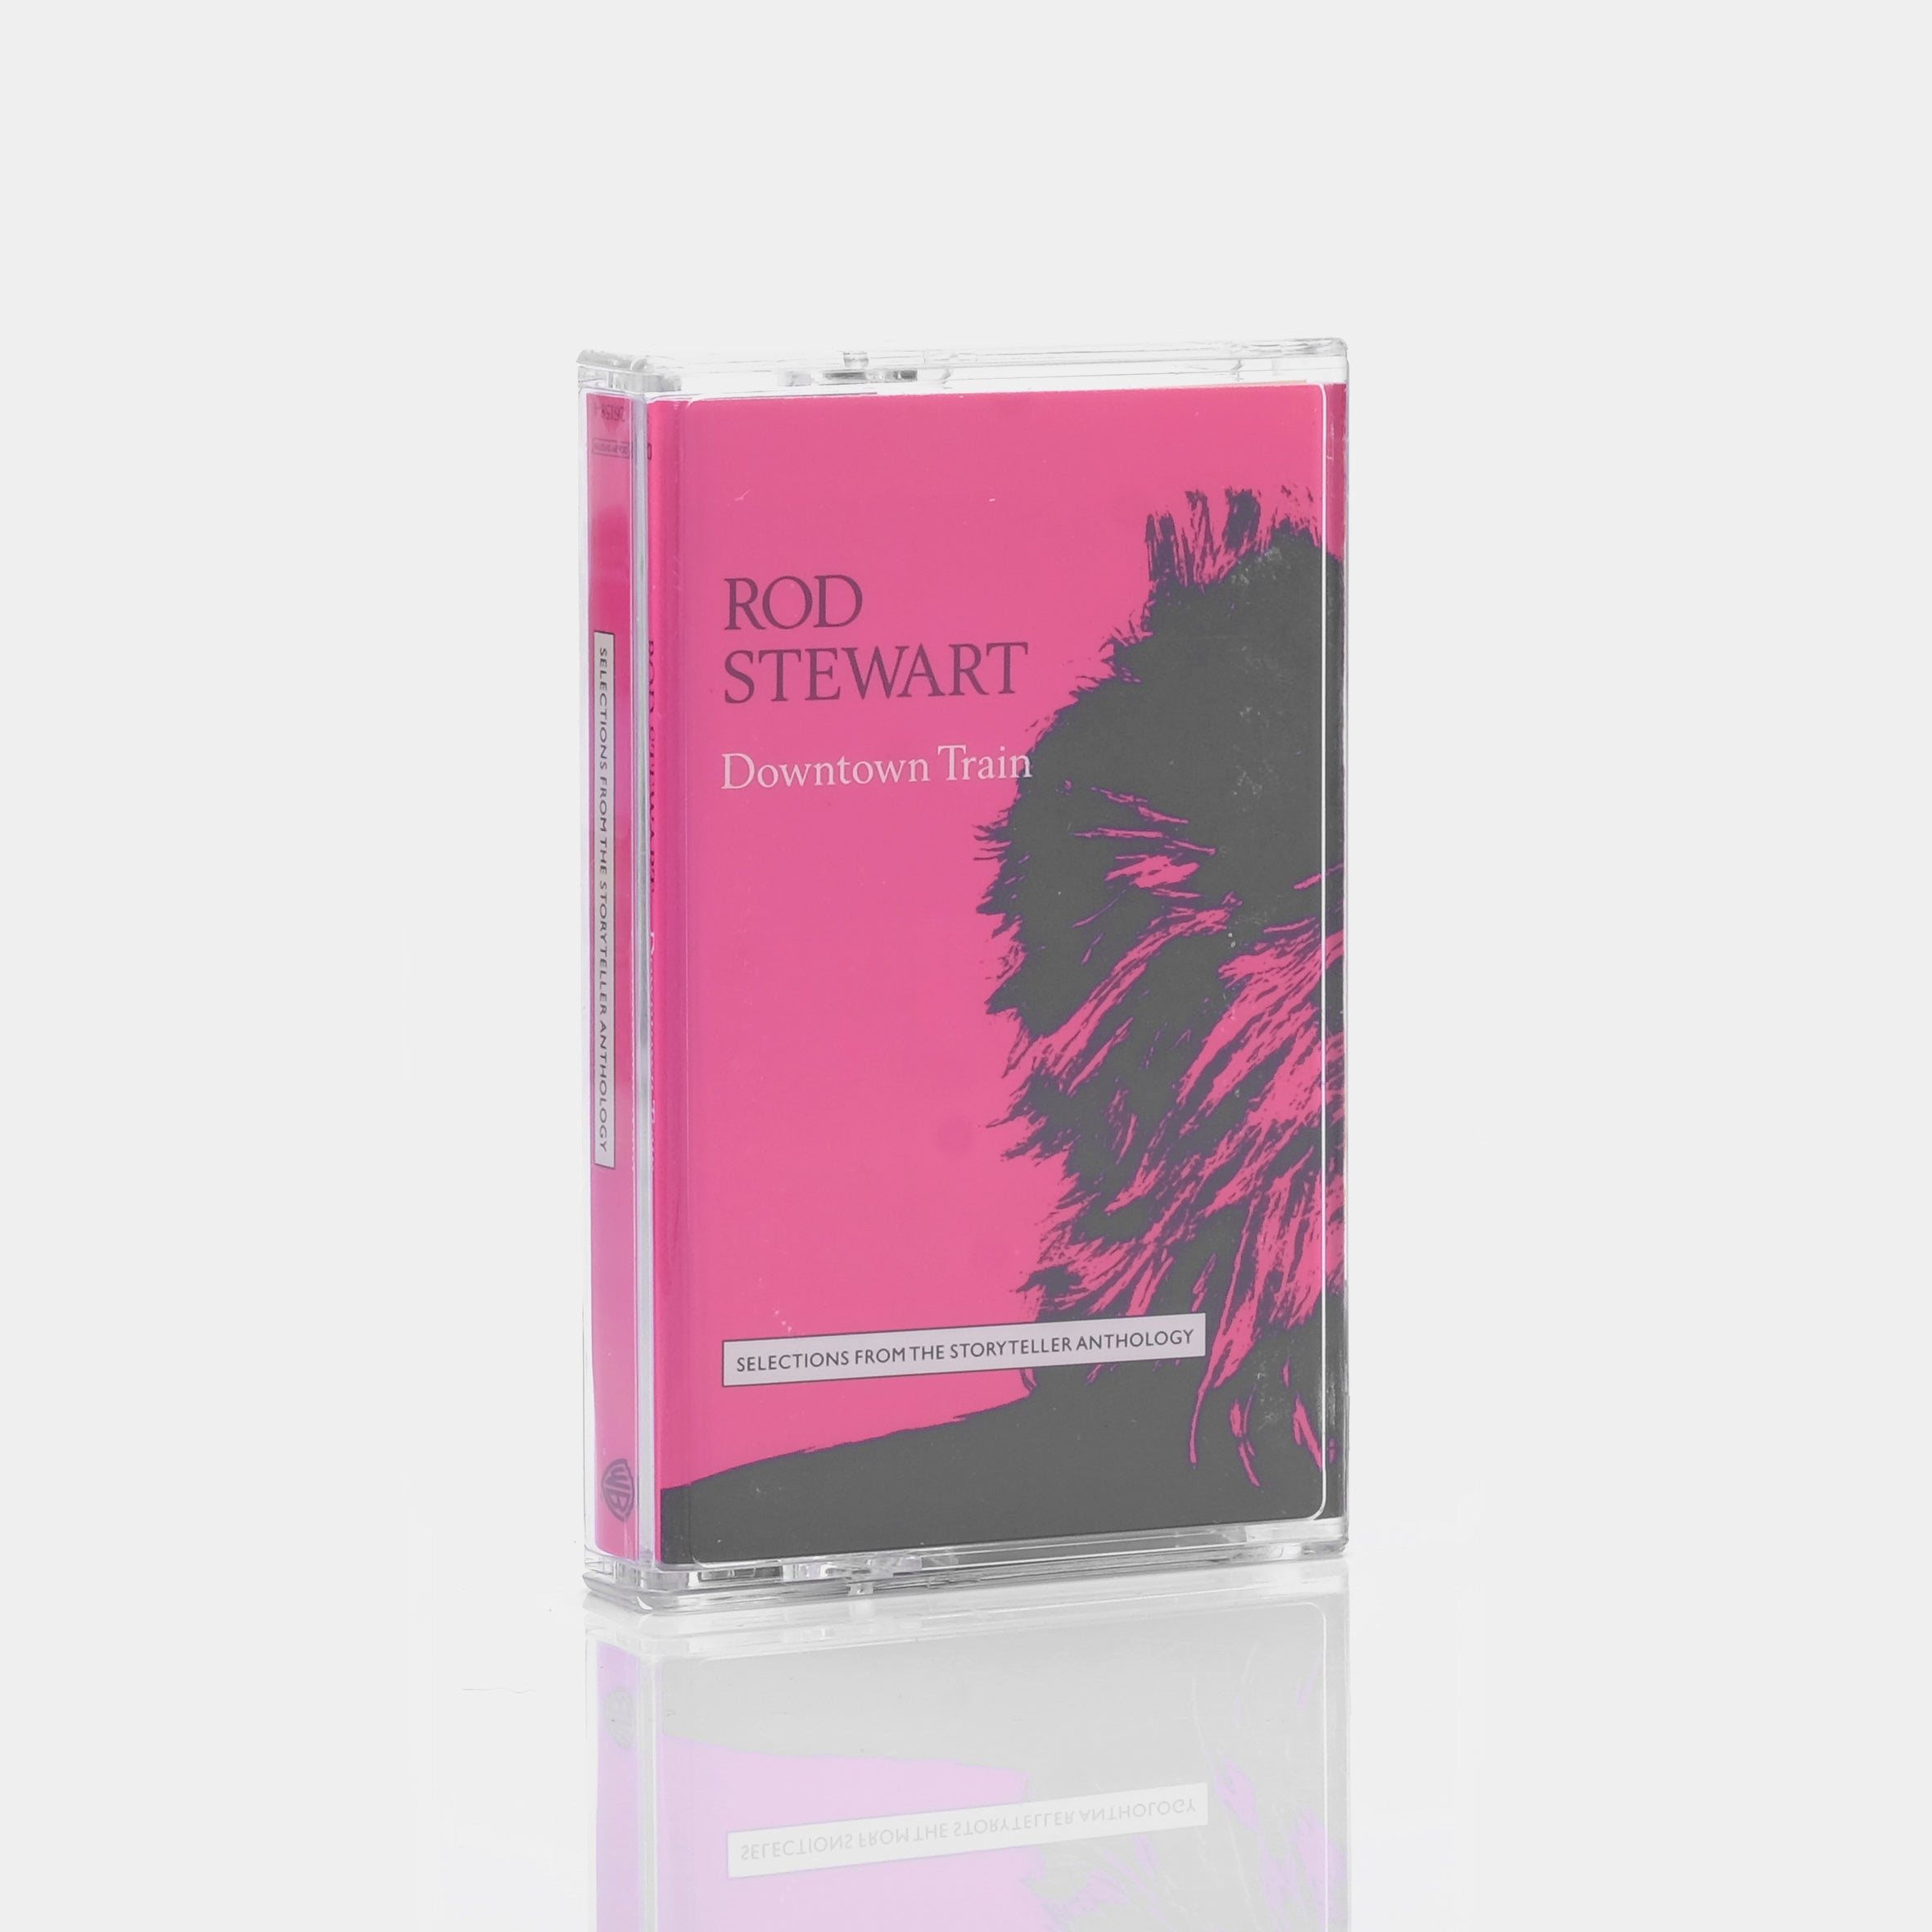 Rod Stewart - Downtown Train (Selections From The Storyteller Anthology) Cassette Tape